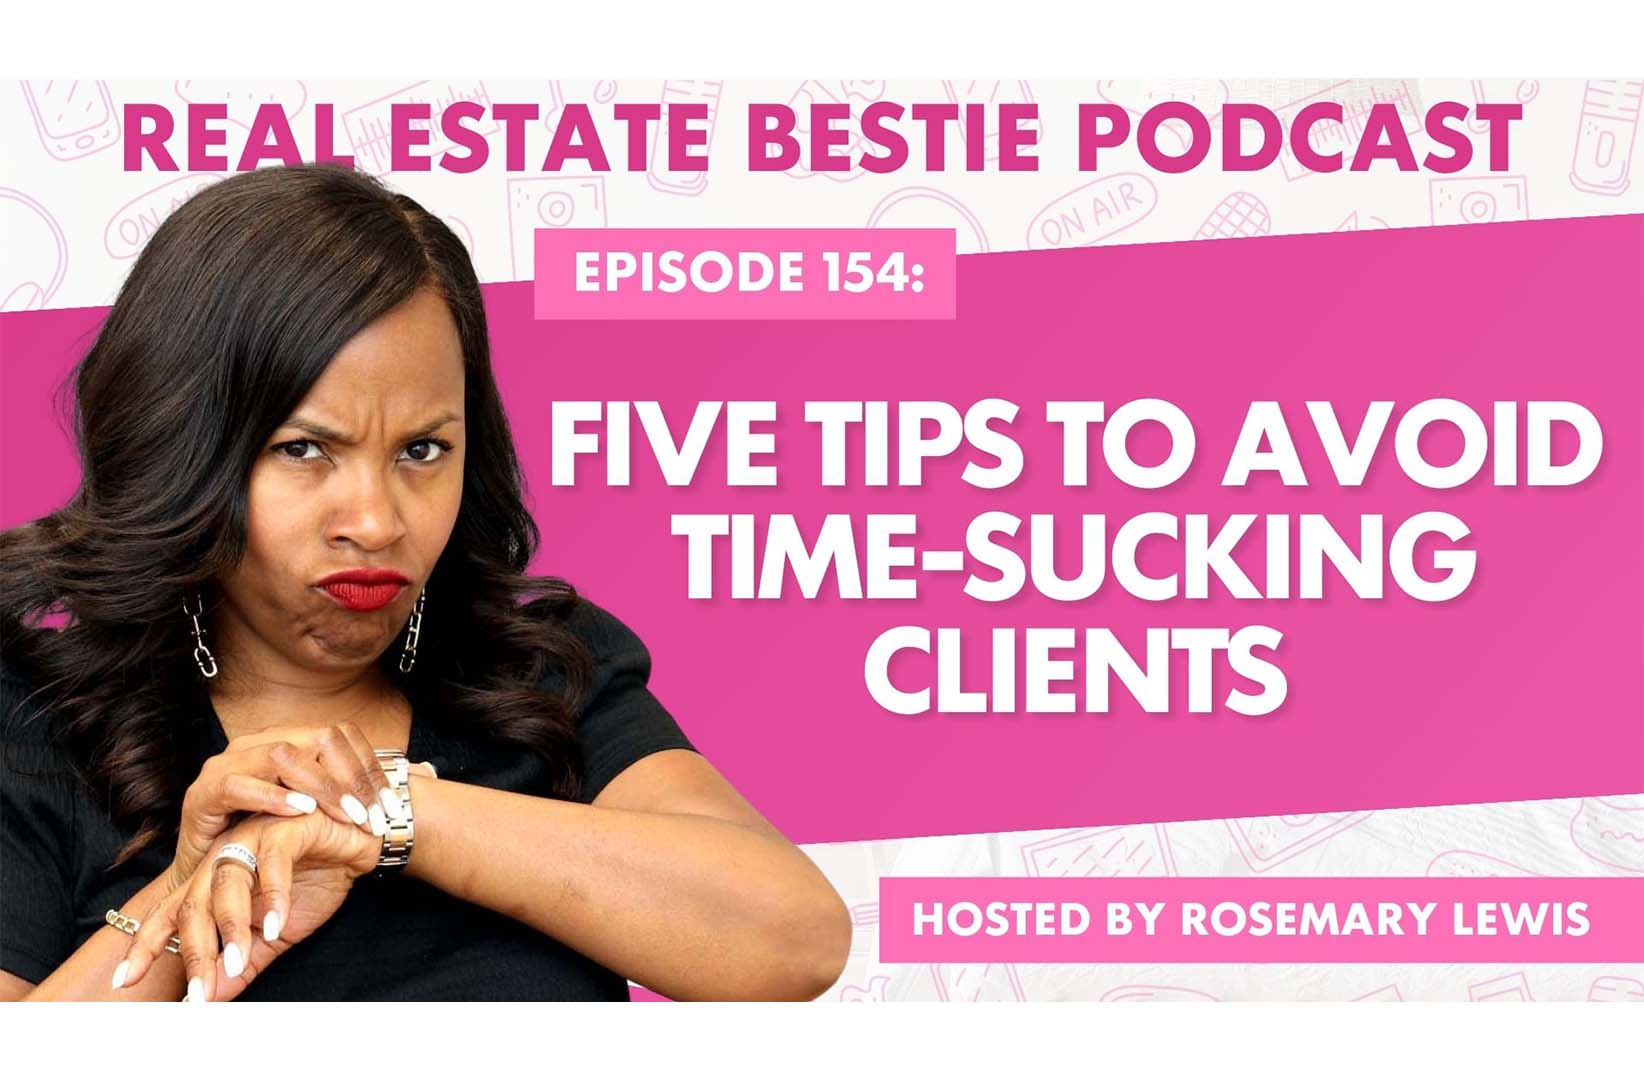 Five Tips to Avoid Time-Sucking Clients - Real Estate Bestie Podcast - Rosemary Lewis